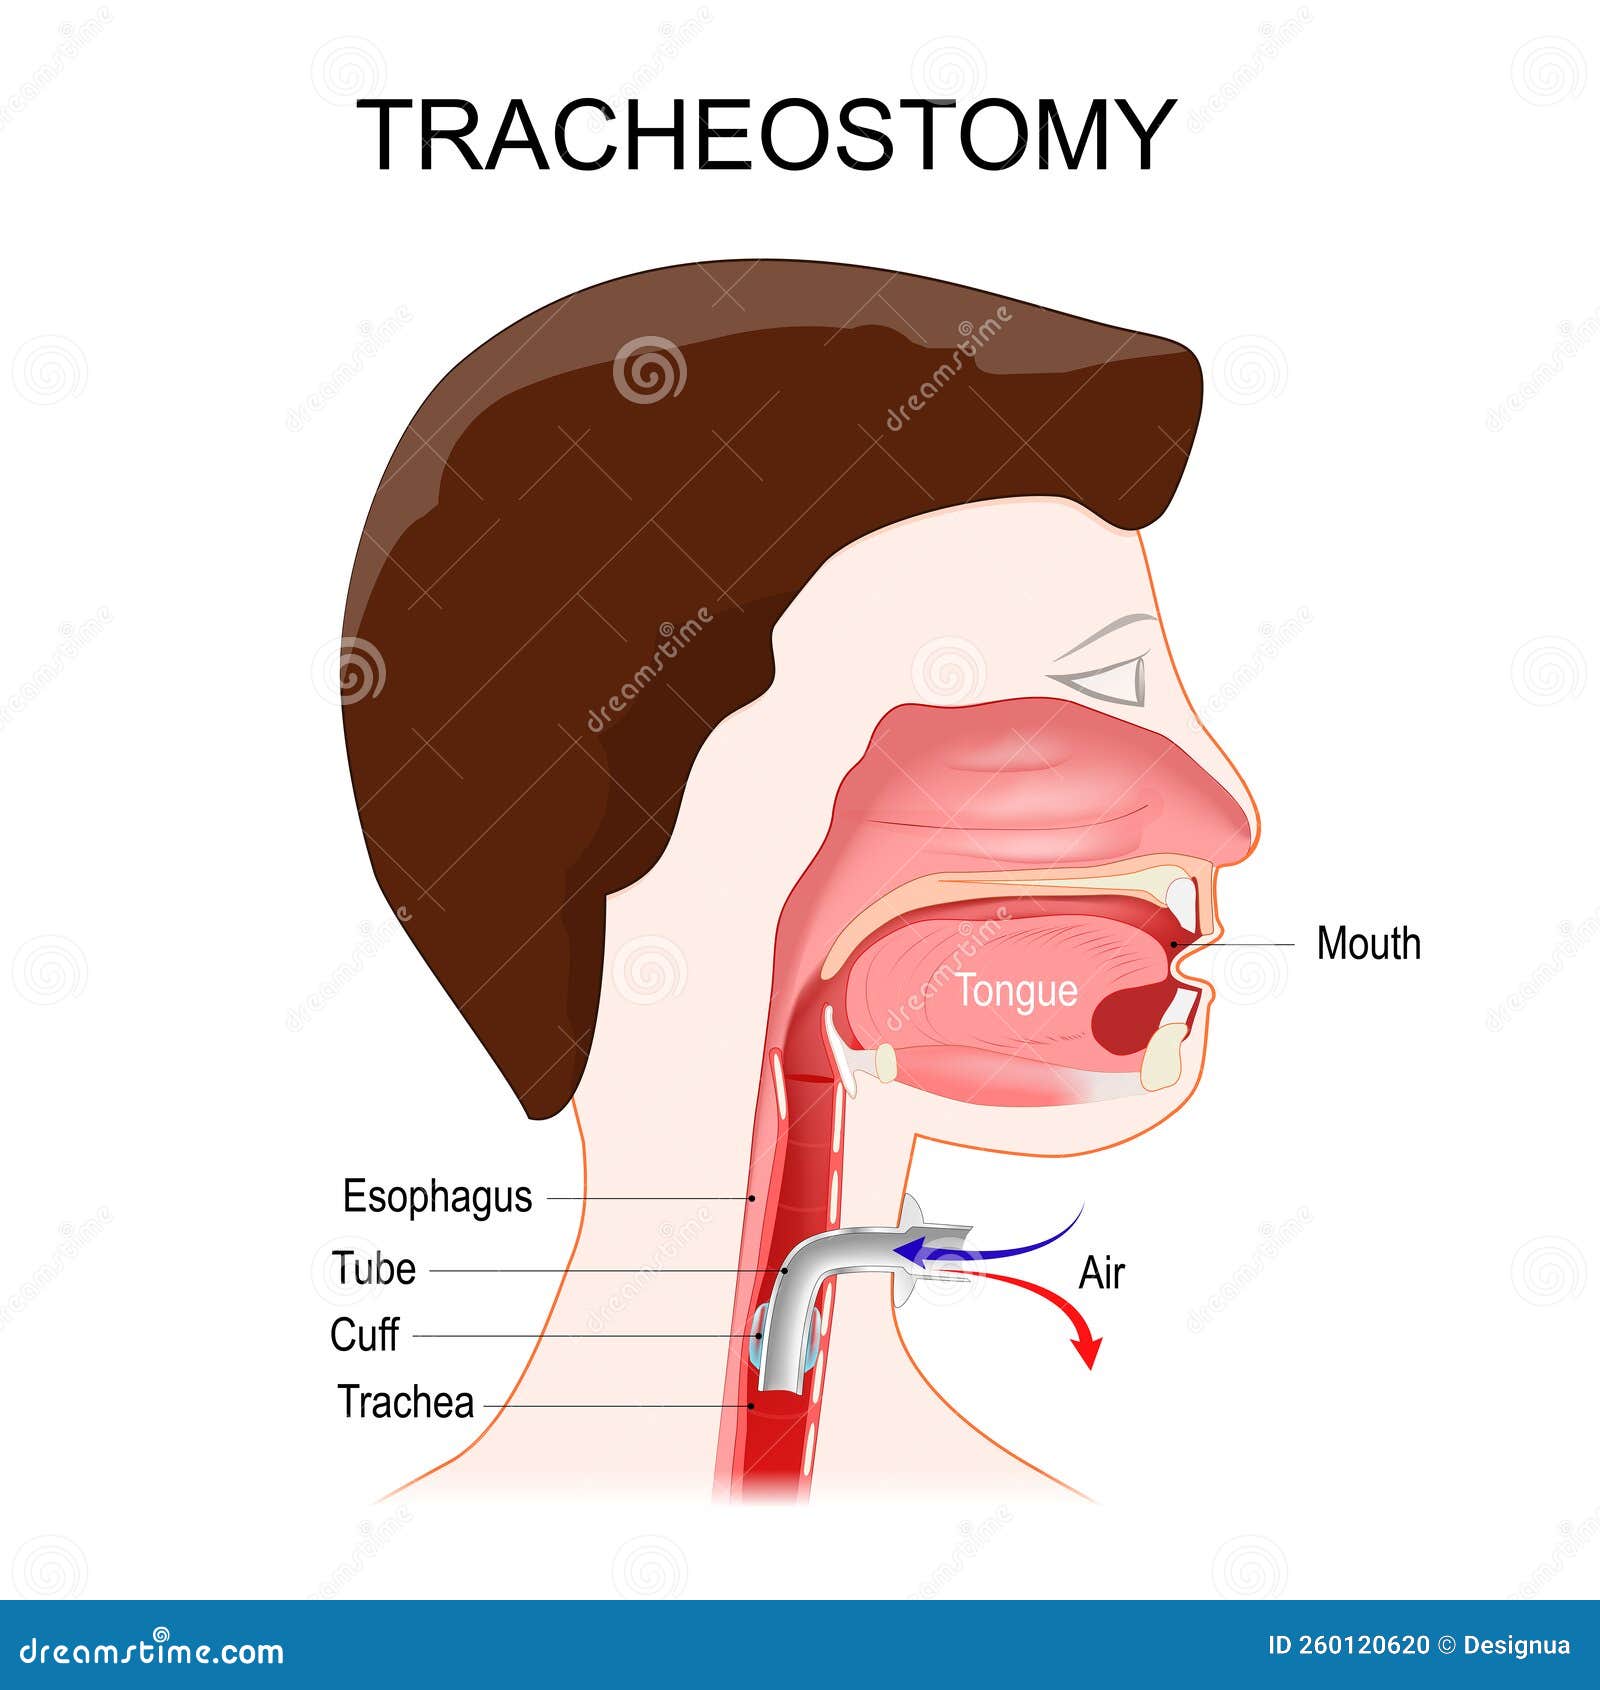 Tracheotomy Side View Of The Neck And The Correct Placement Of A